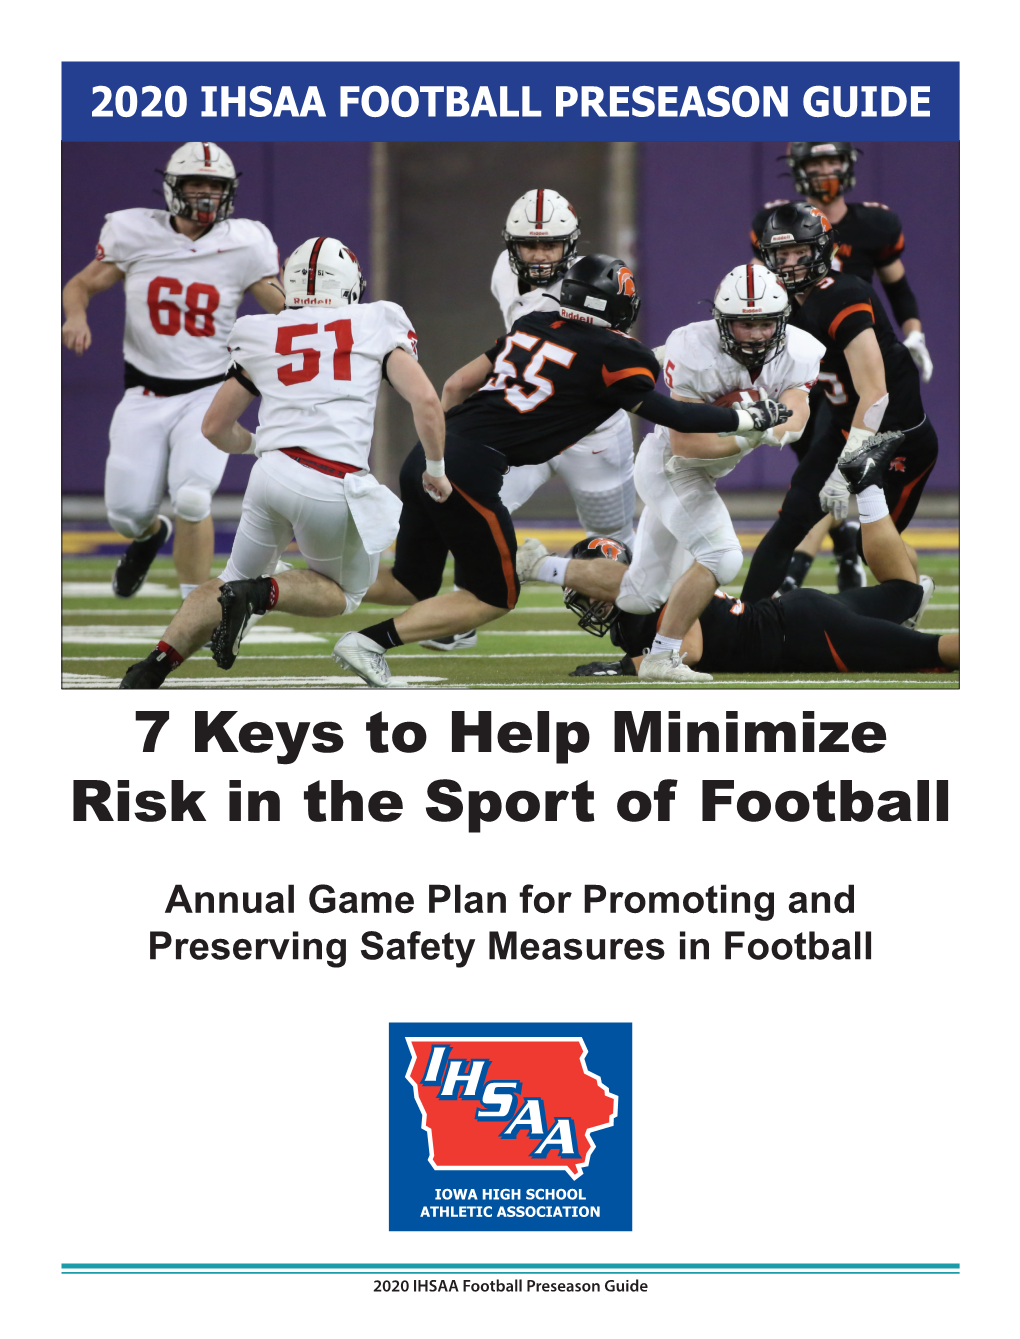 7 Keys to Help Minimize Risk in the Sport of Football